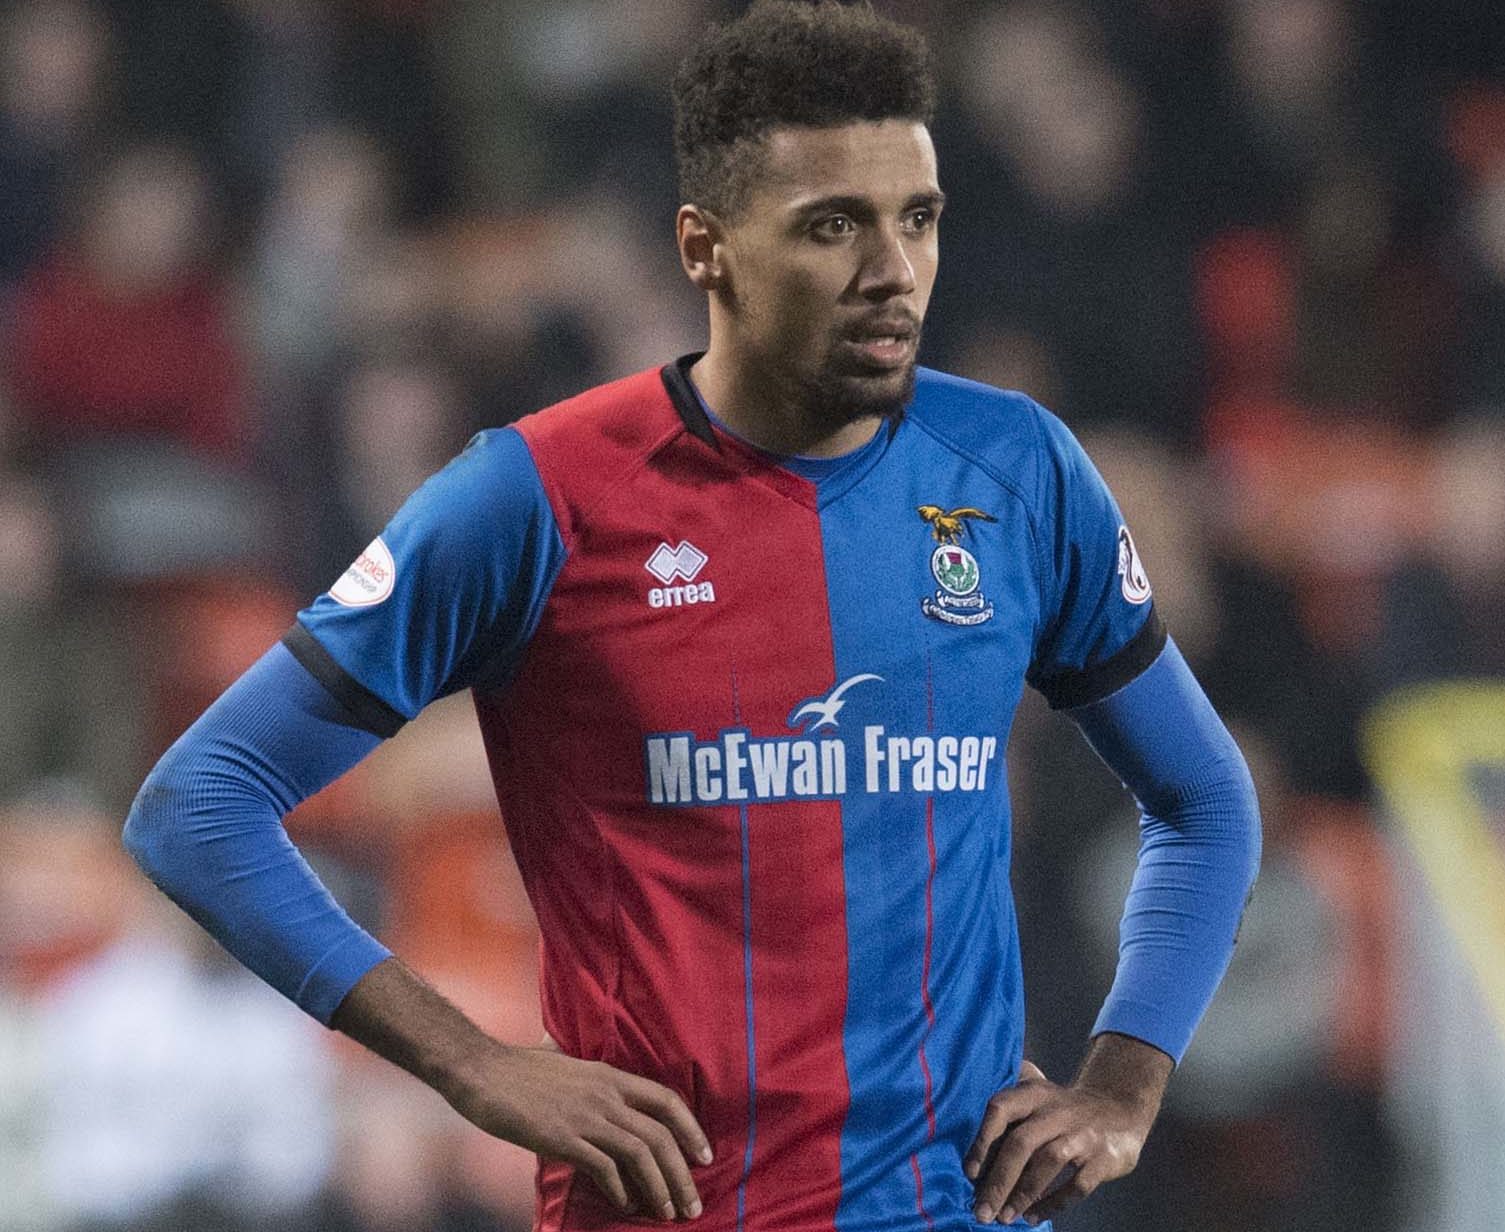 Nathan Austin in action for Inverness.